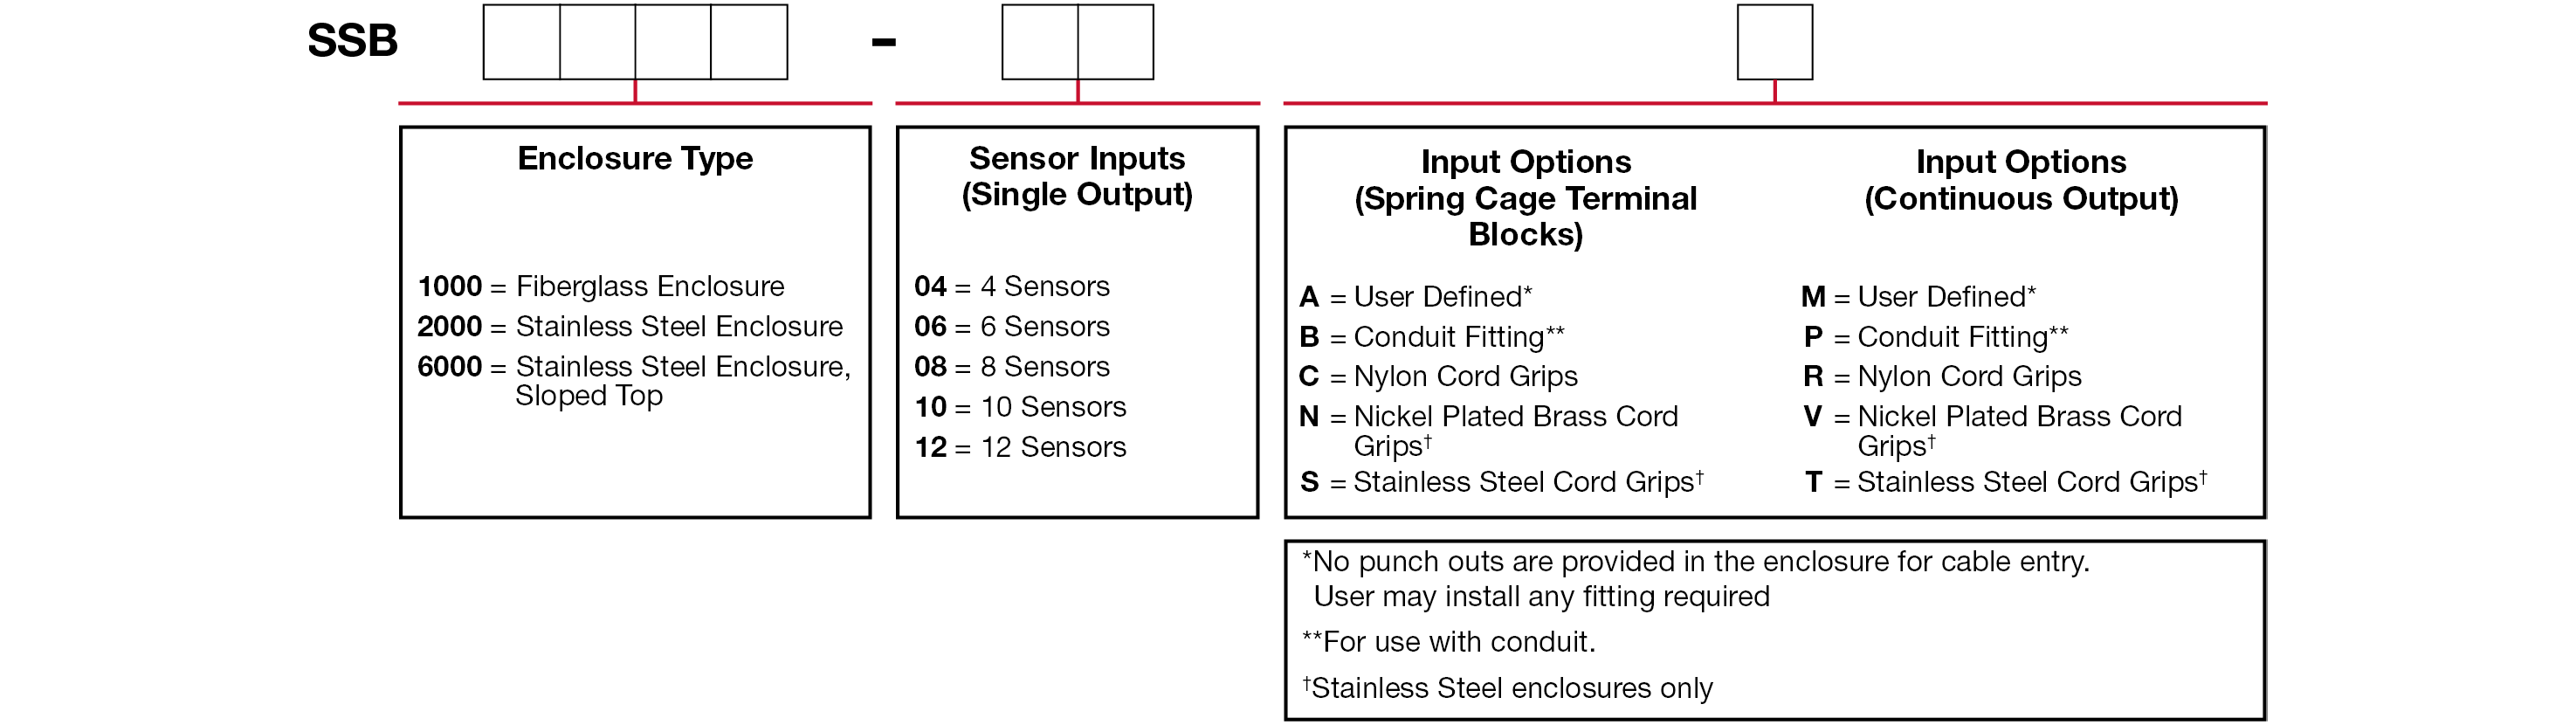 A chart showing configuration options to create a complete part number for ordering a CTC SSB2000 enclosure.